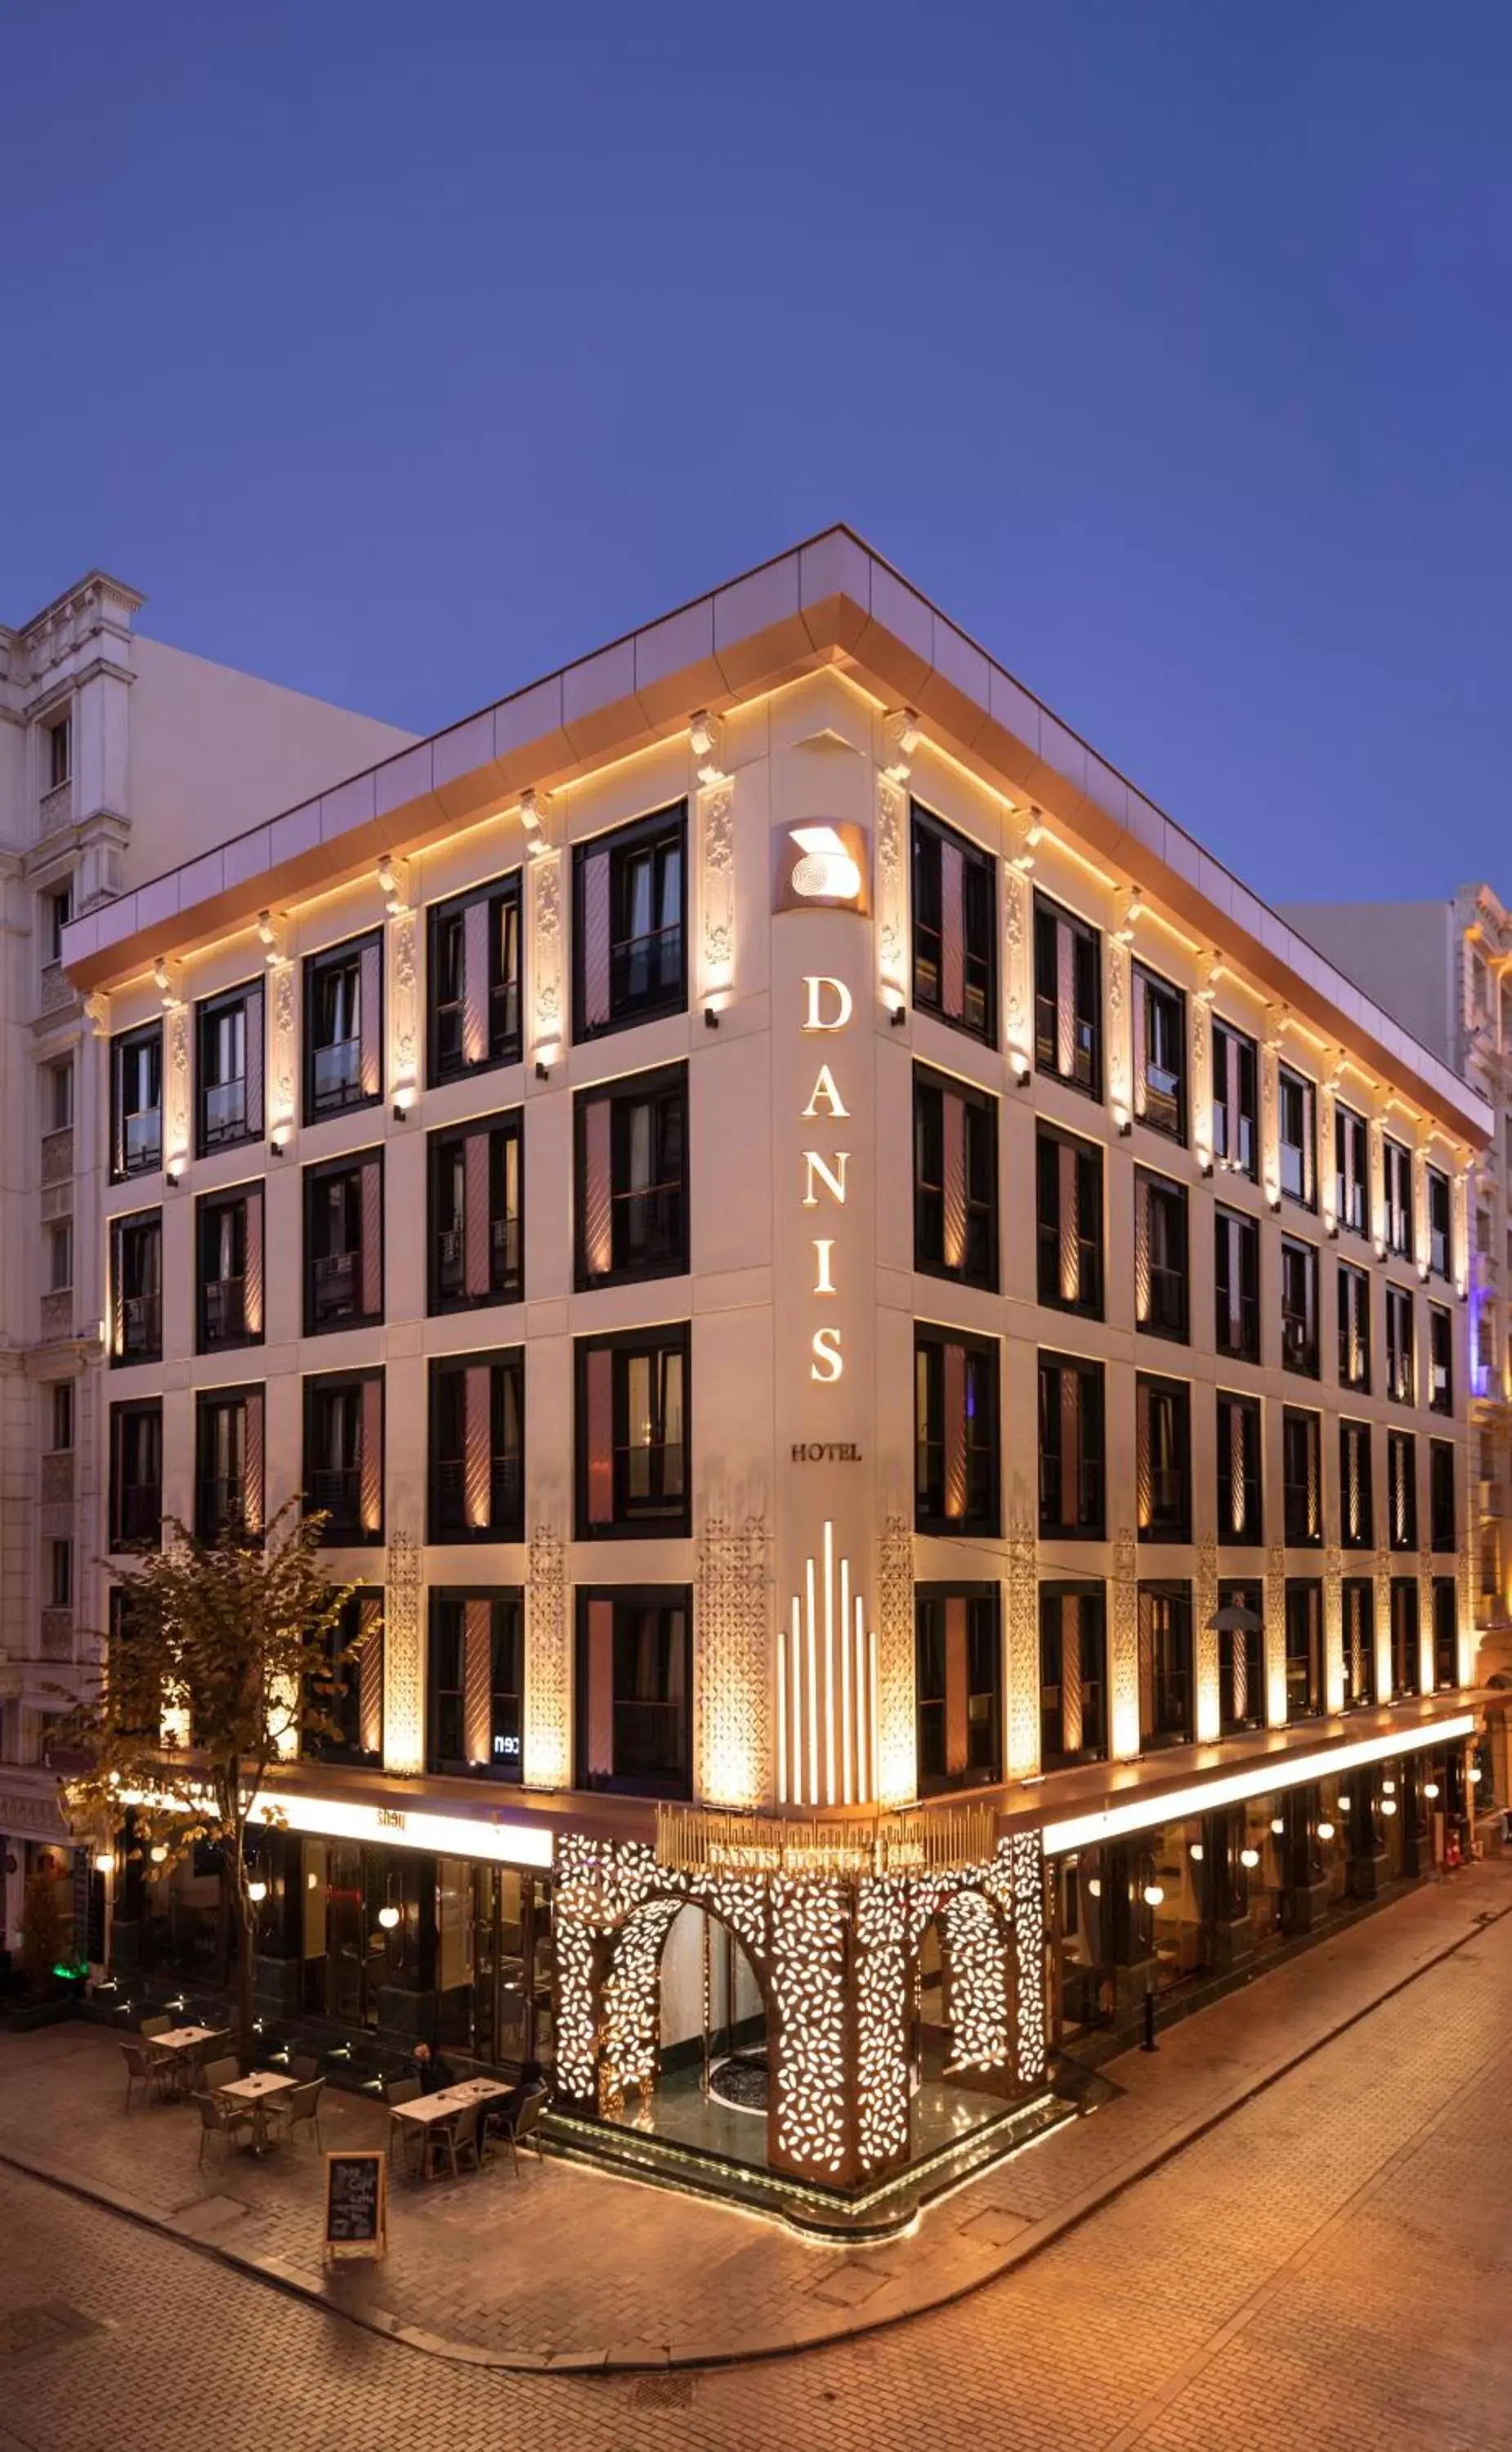 Property Building in Danis Hotel Istanbul Old City